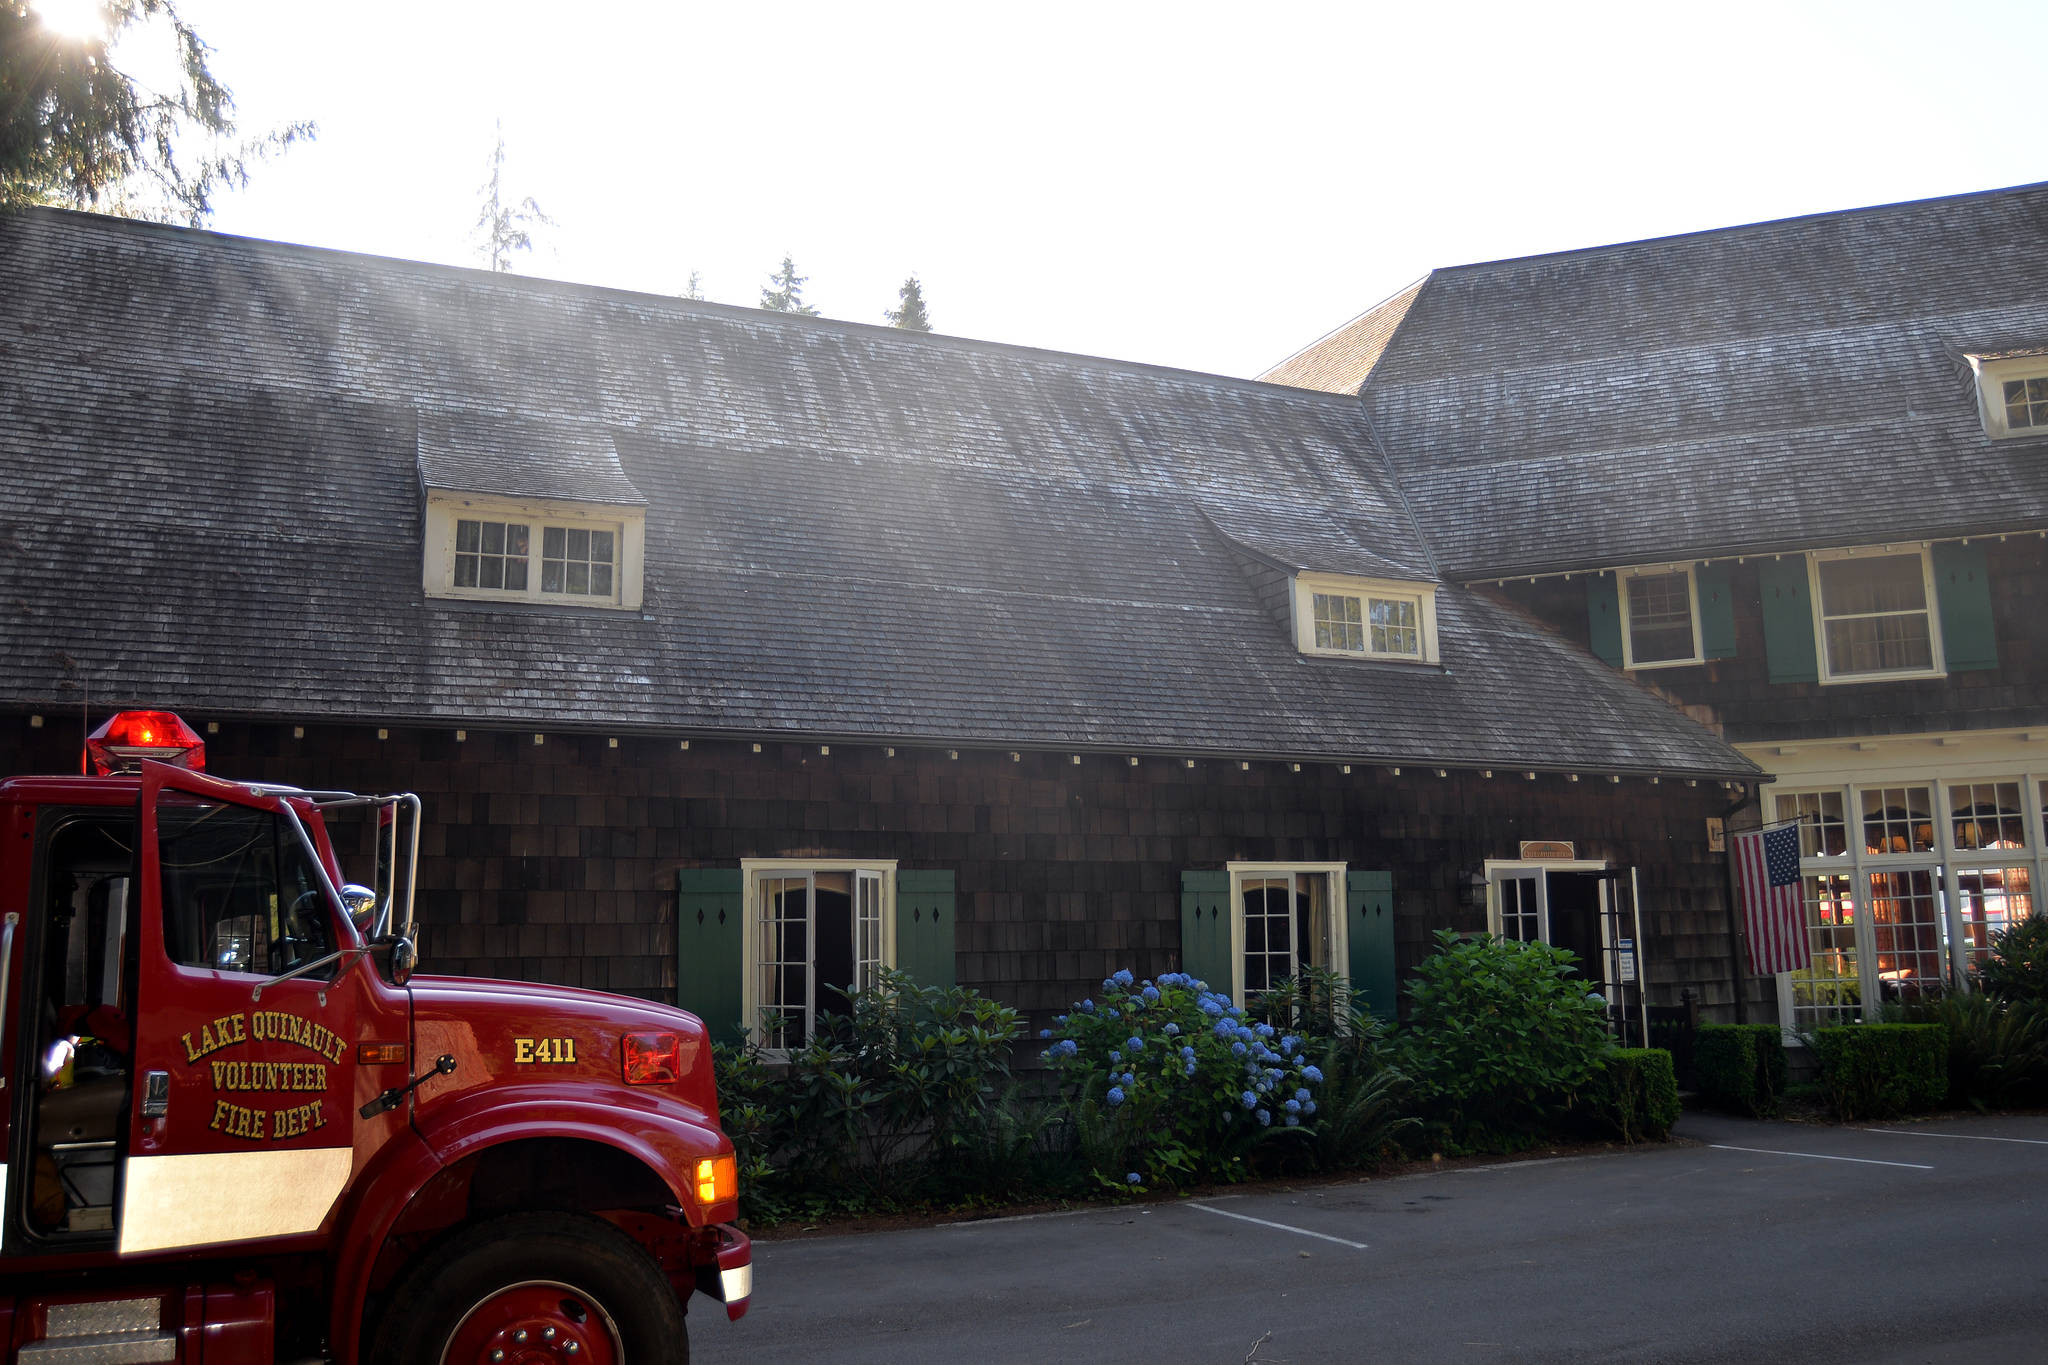 DAVE HAVILAND | THE DAILY WORLD
A small fire in the insulation under the Lake Quinault Lodge prompted evacuation and fire crew response Saturday afternoon.